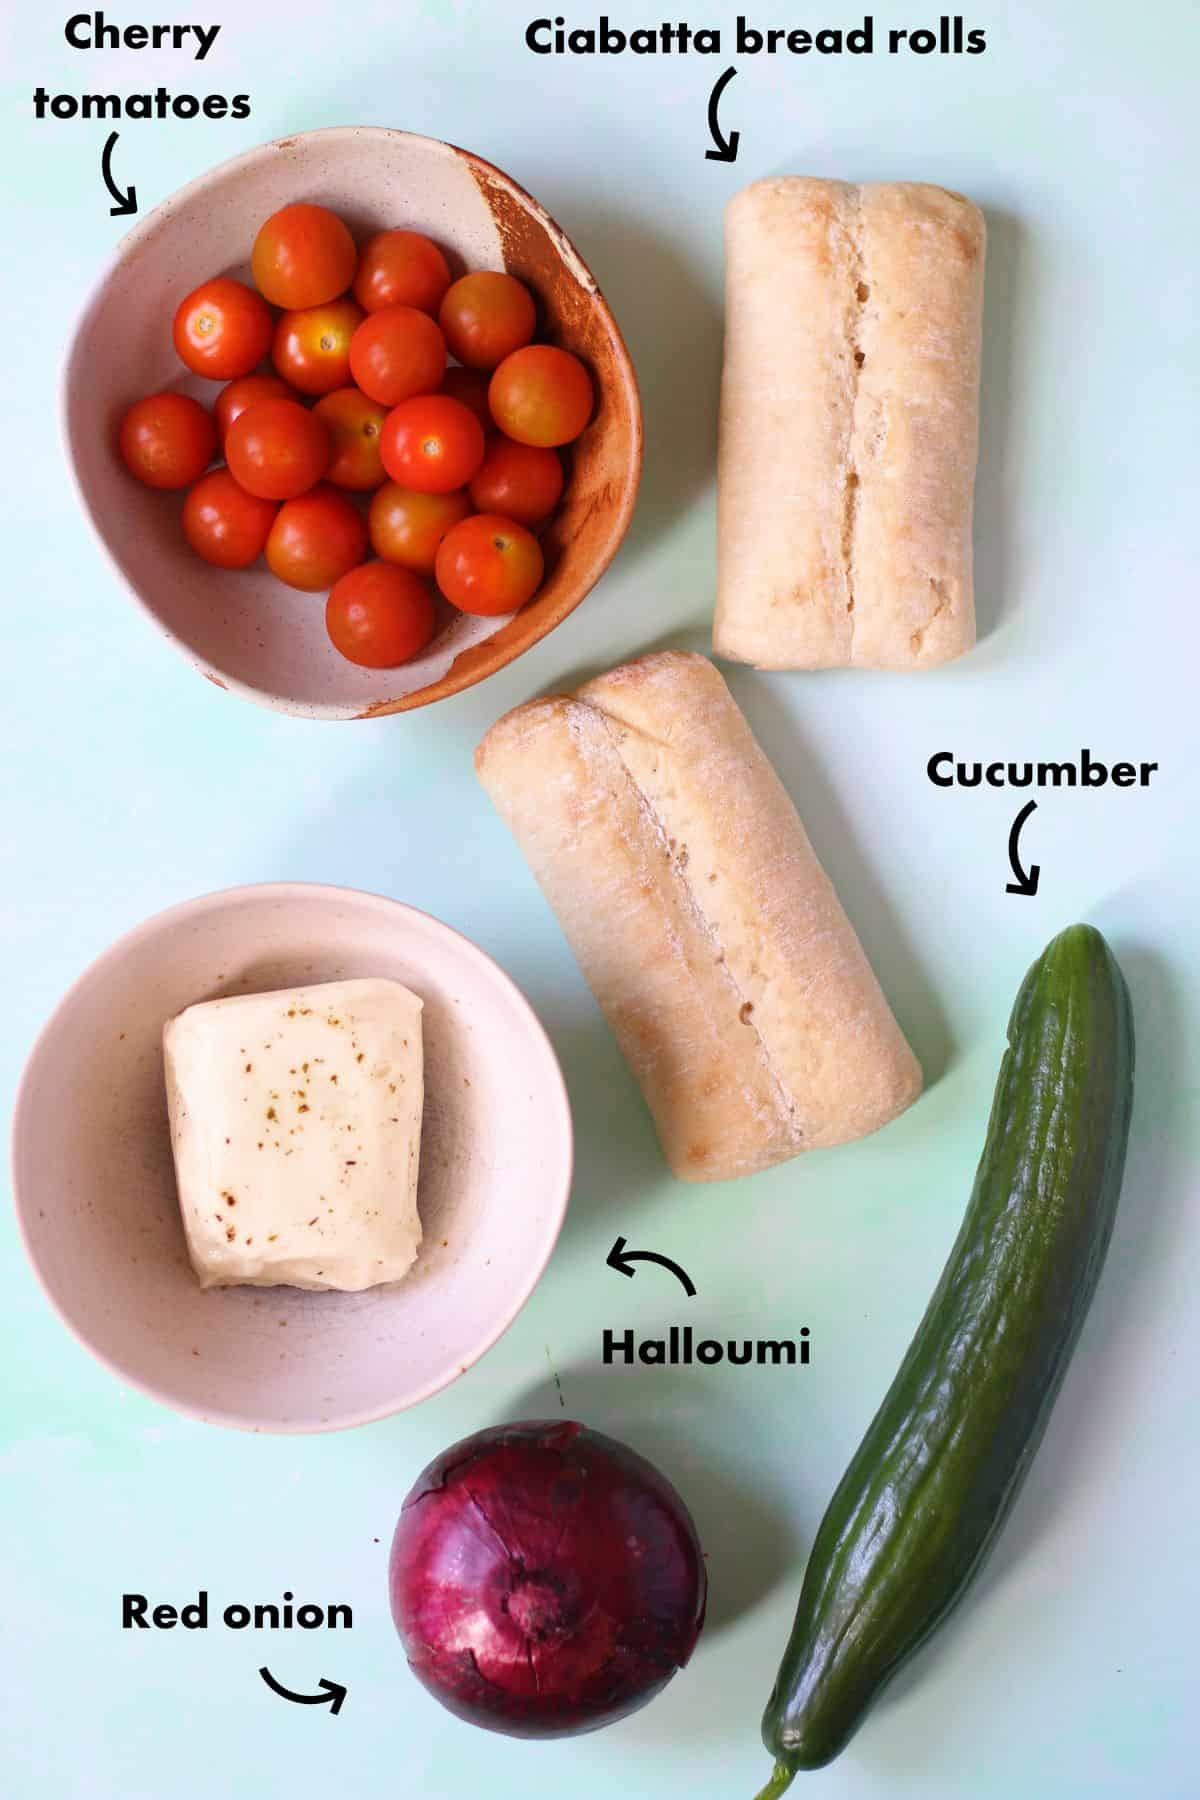 Ingredients to make Halloumi bread salad laid out on a pale blue background and labelled.